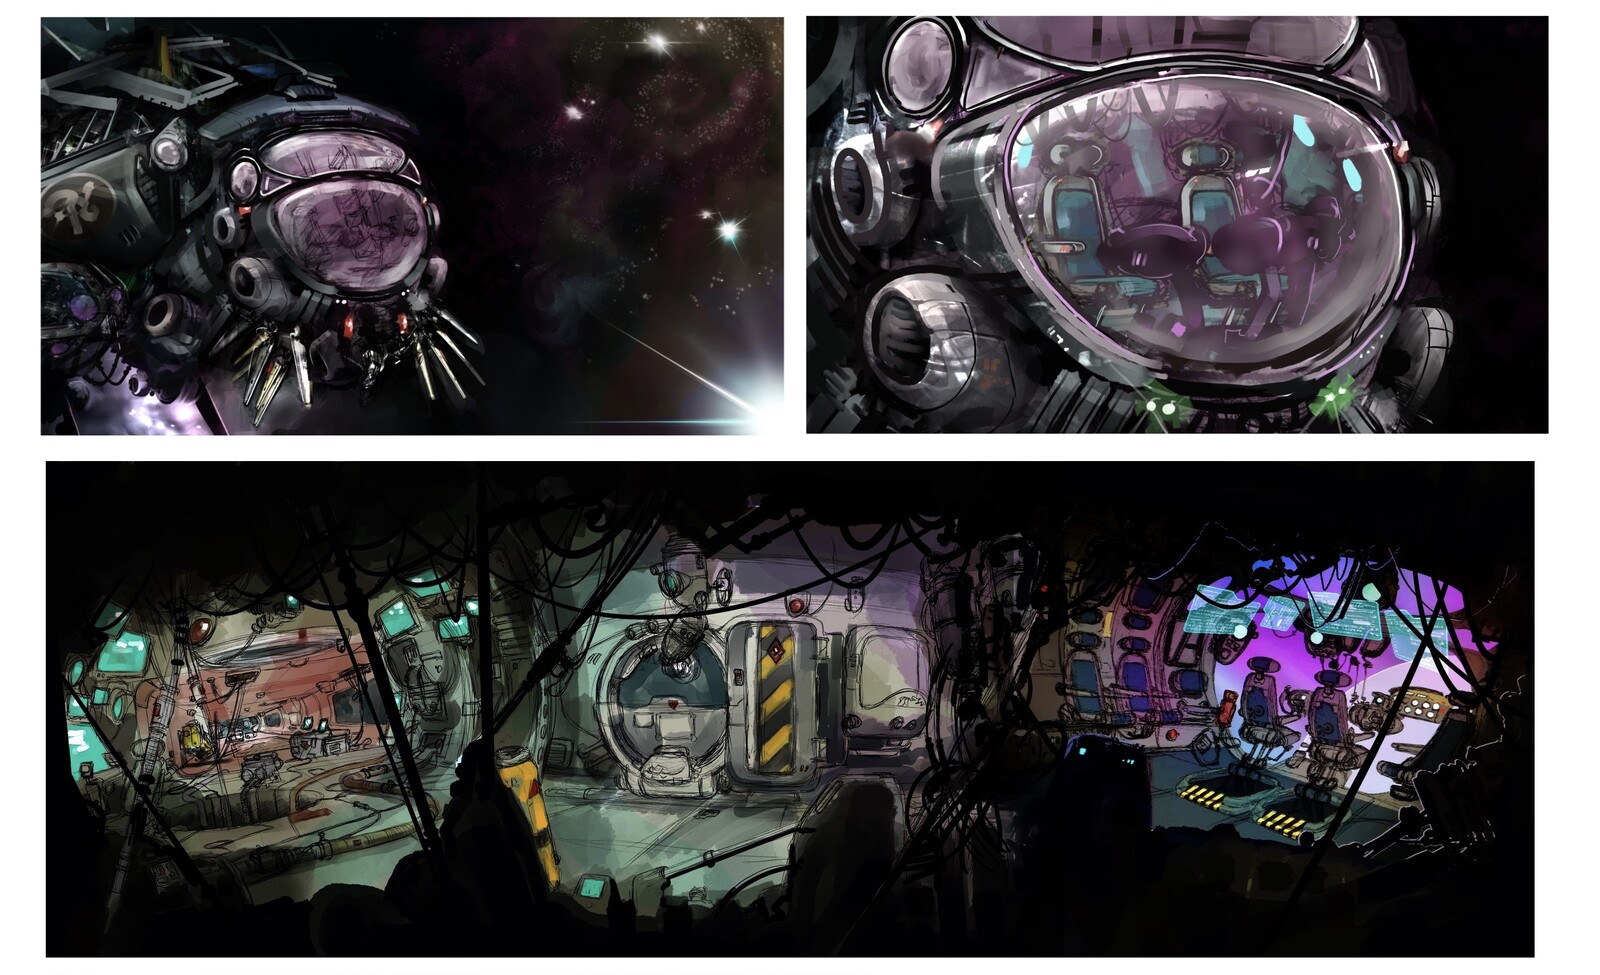 Closer shots and interiors of the main ship, developed as sketches for testing shots then later painted over to become the final background art in the finished scenes.